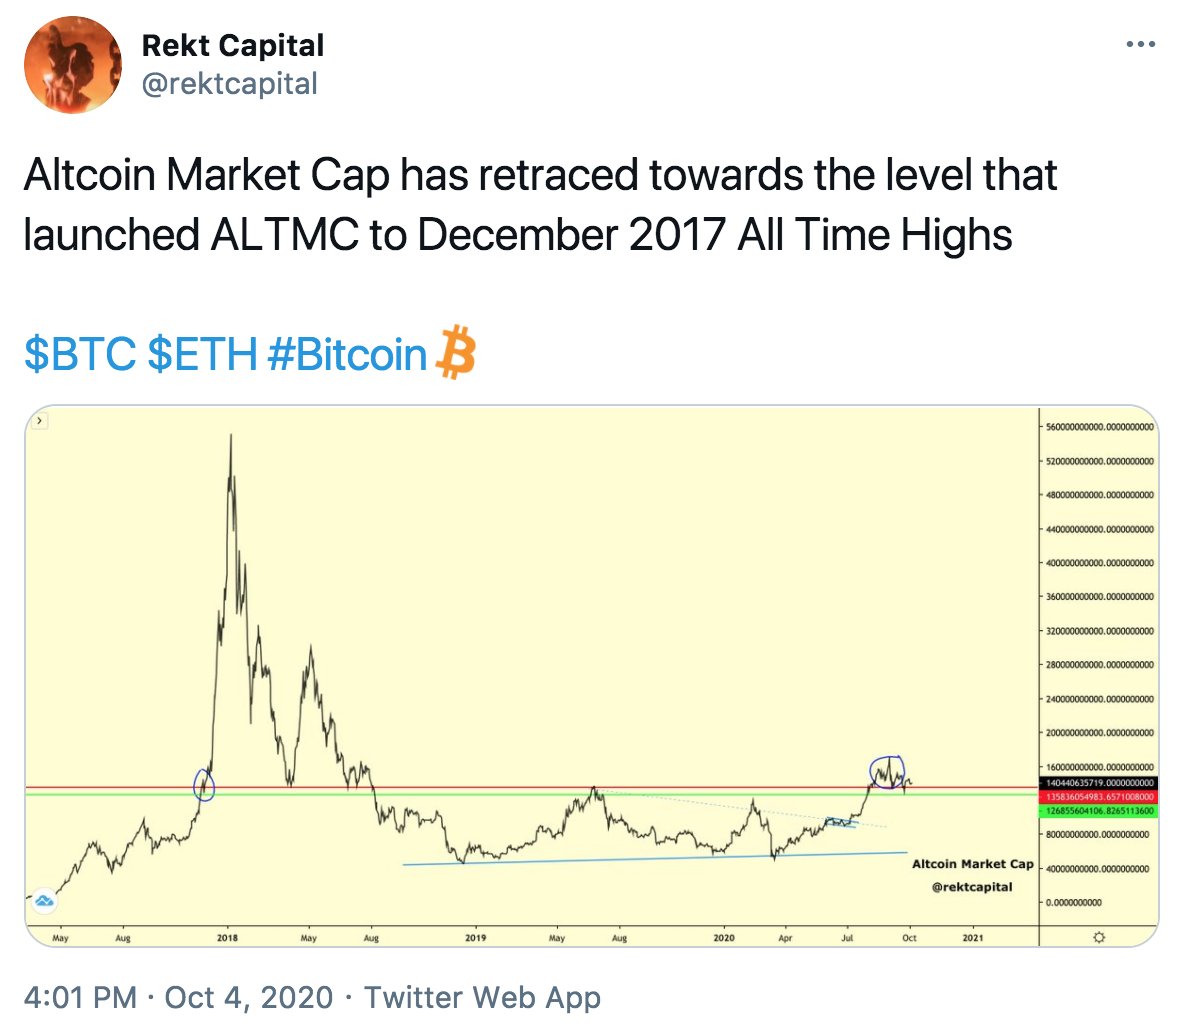 2. Back in October 2020, Altcoin Market Cap was testing the same exact area that propelled Altcoins to reach the 2017 All Time Highs...